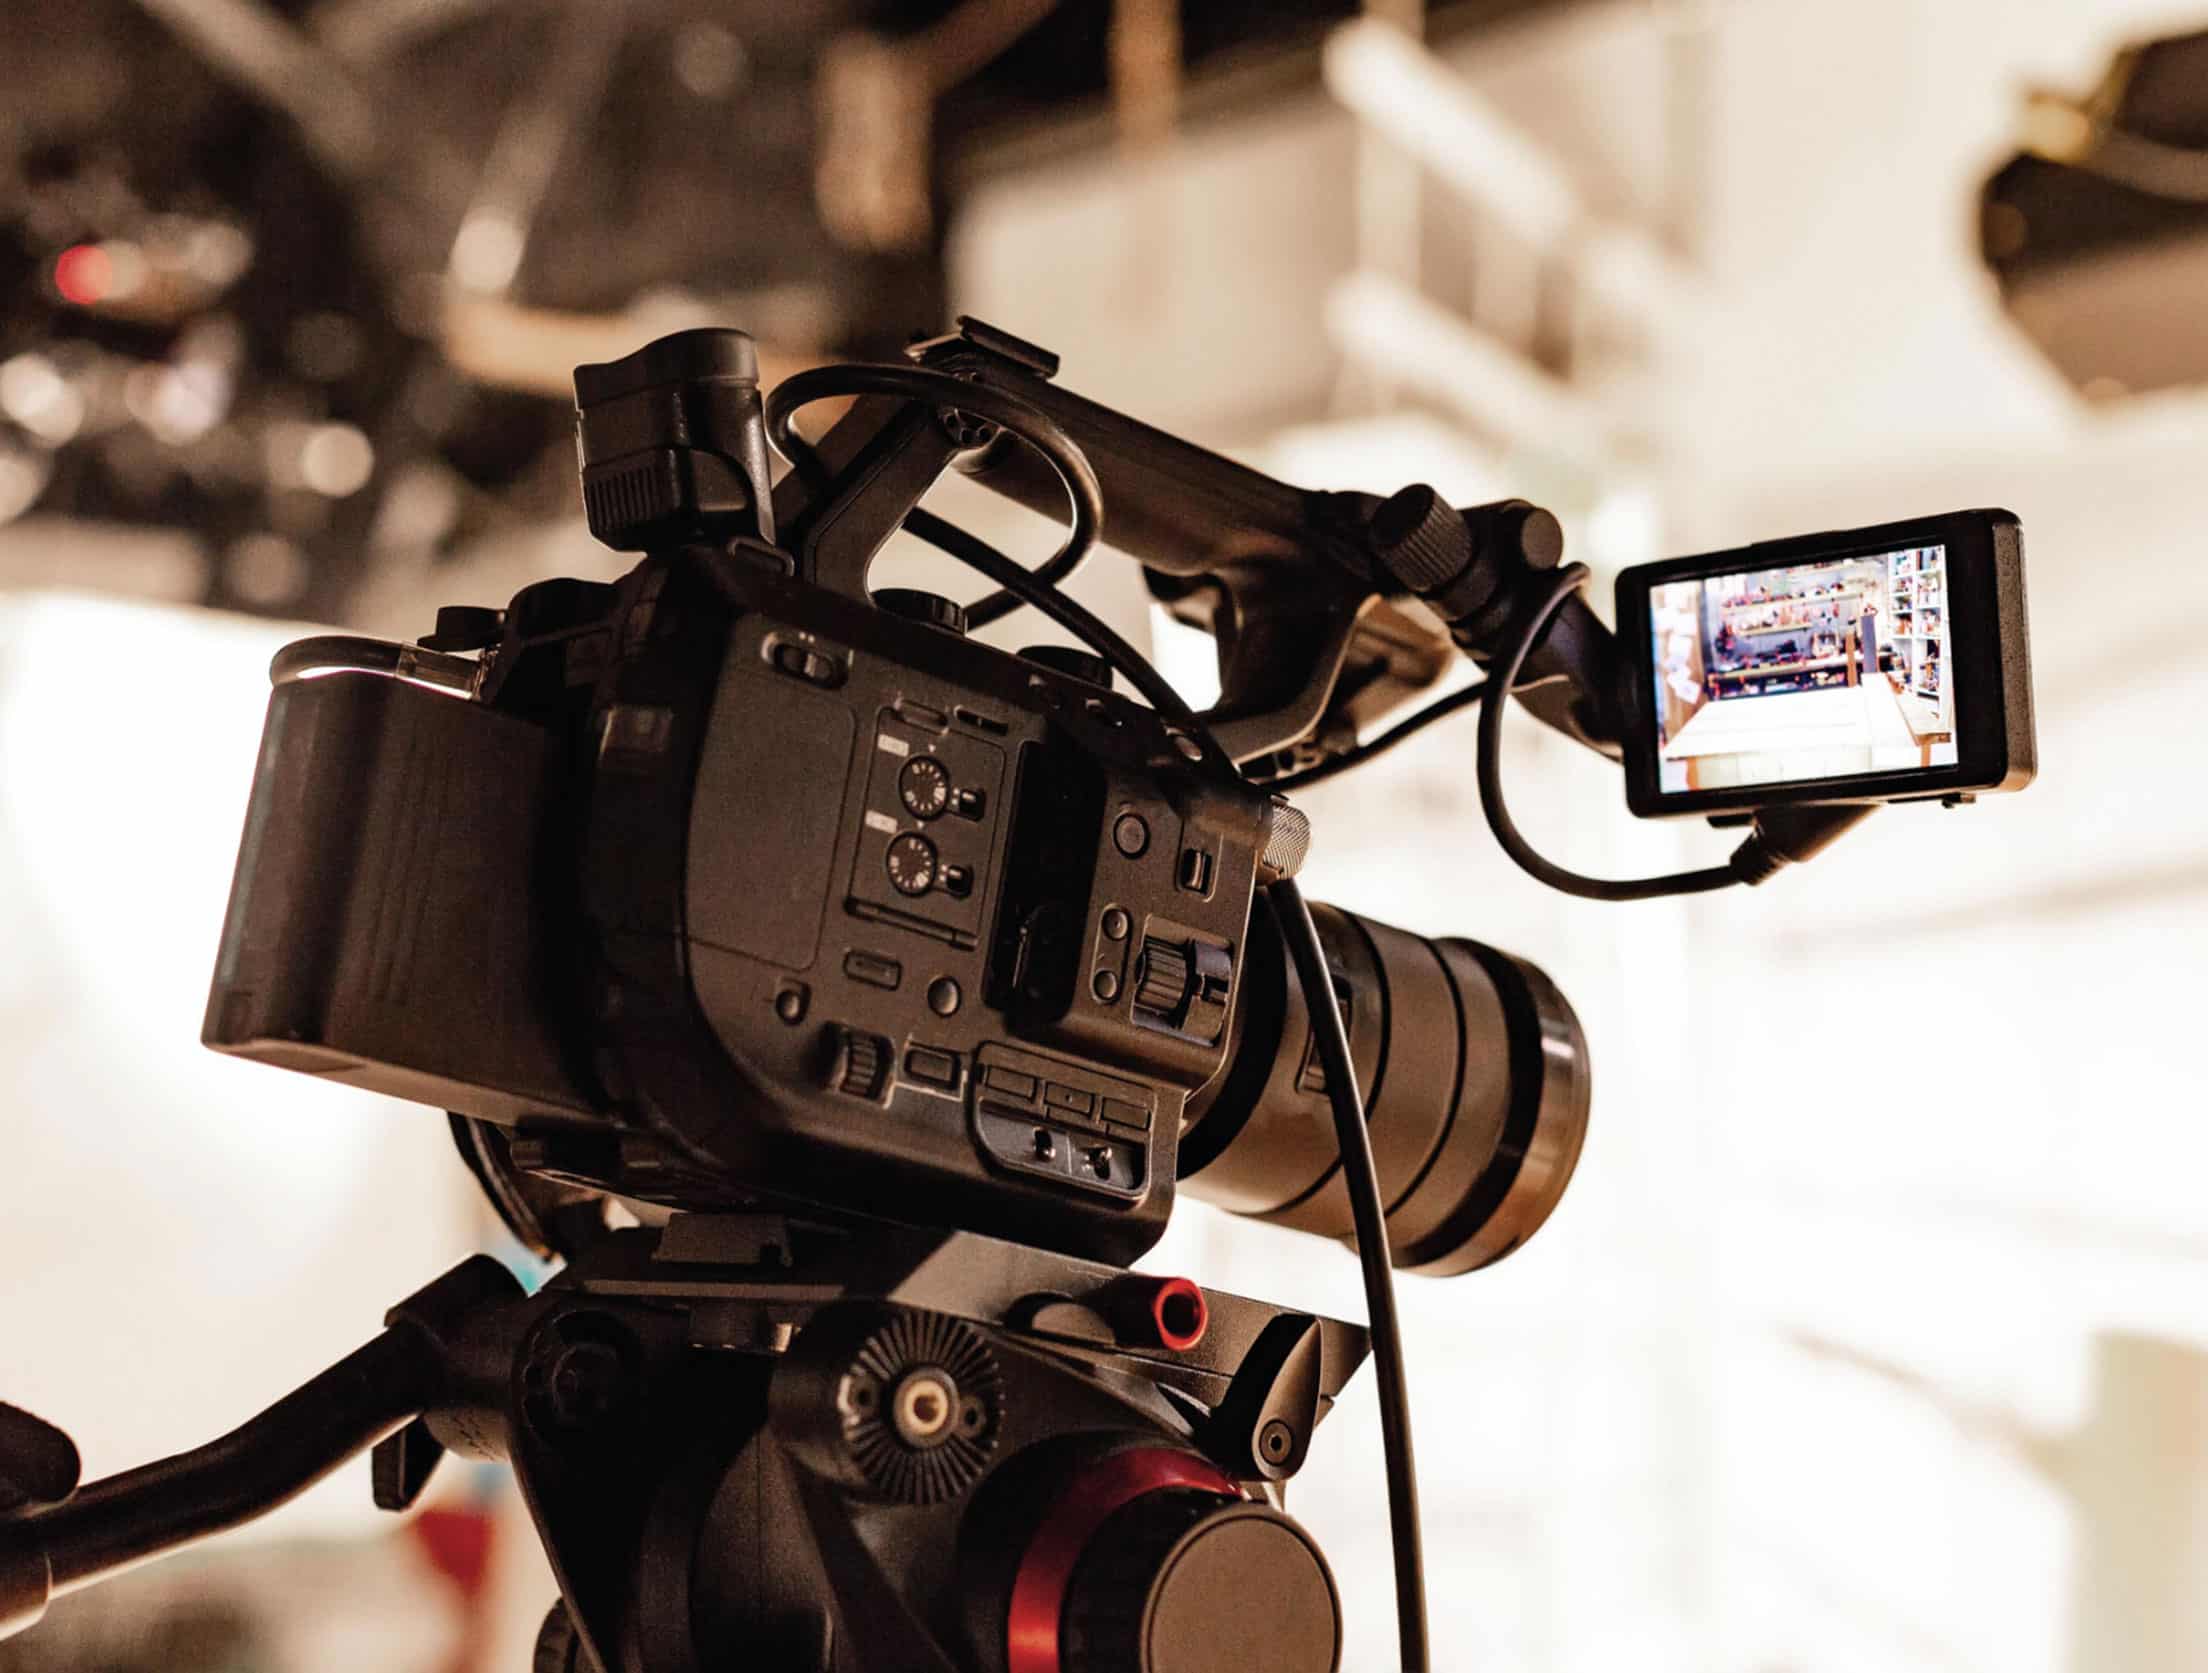 A video camera on the set of a shoot.